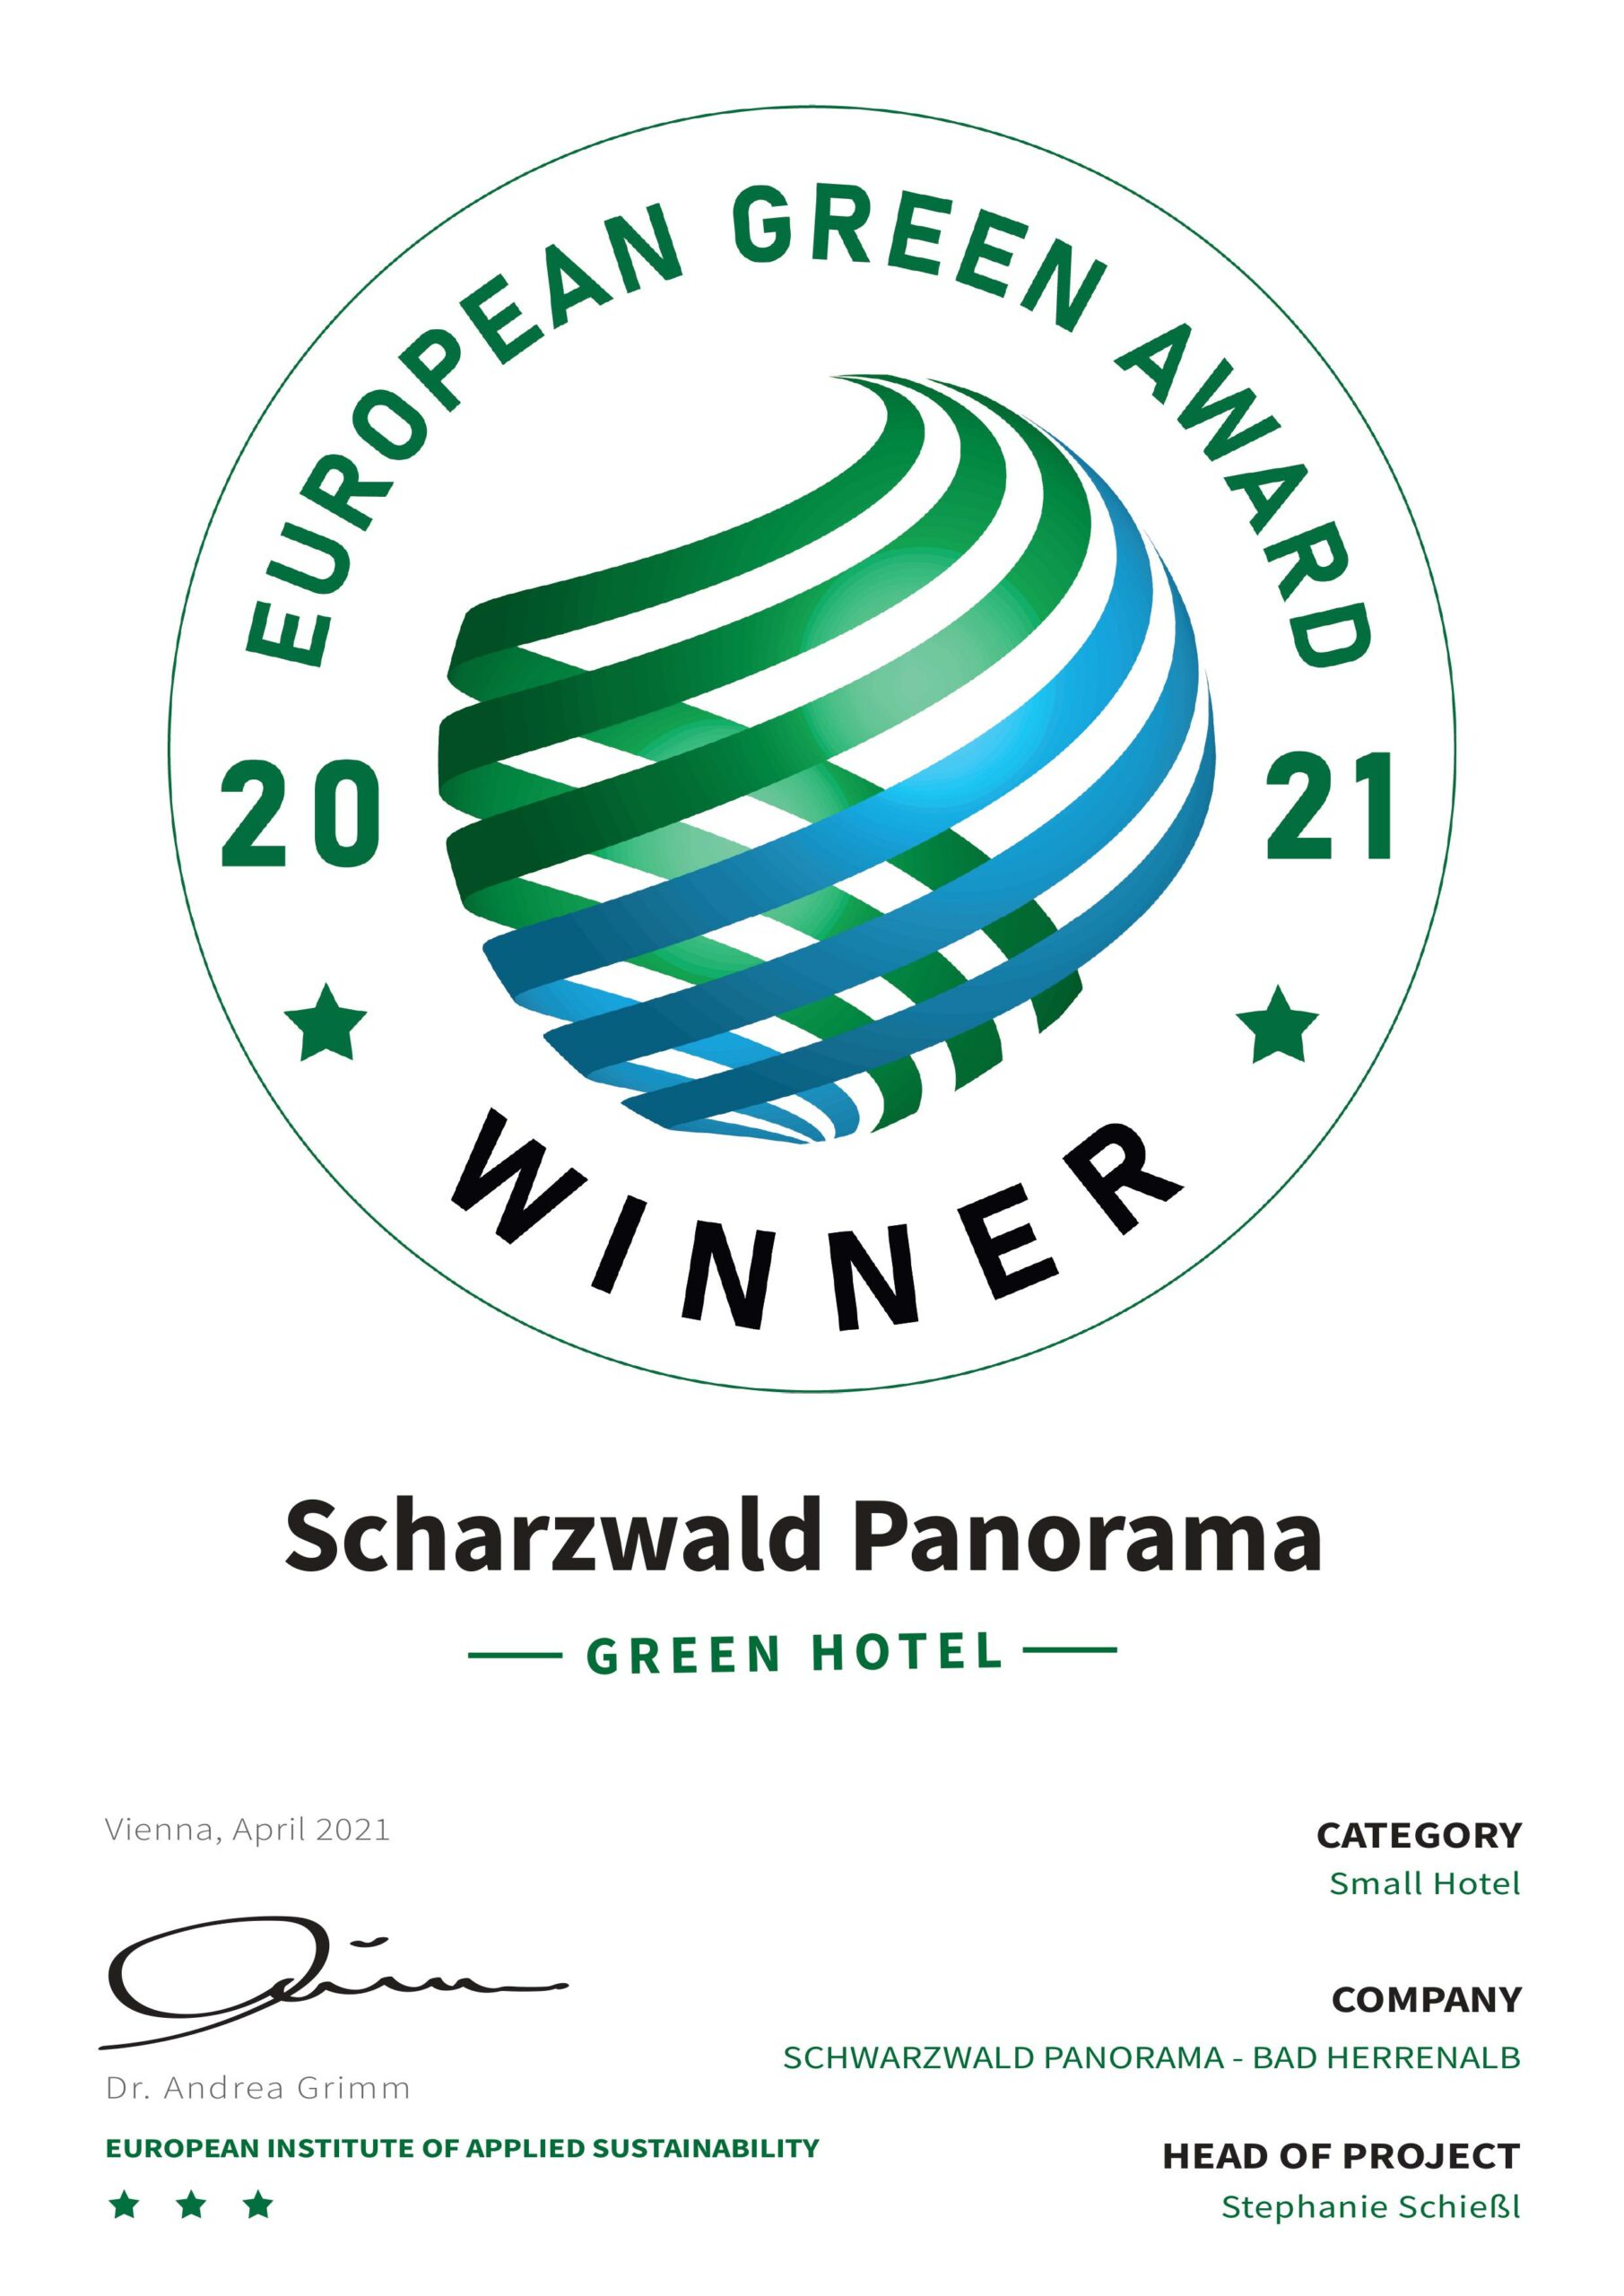 A certificate of the European Green Award for the category small hotel awards the Hotel SCHWARZWALD PANORAMA the title green hotel